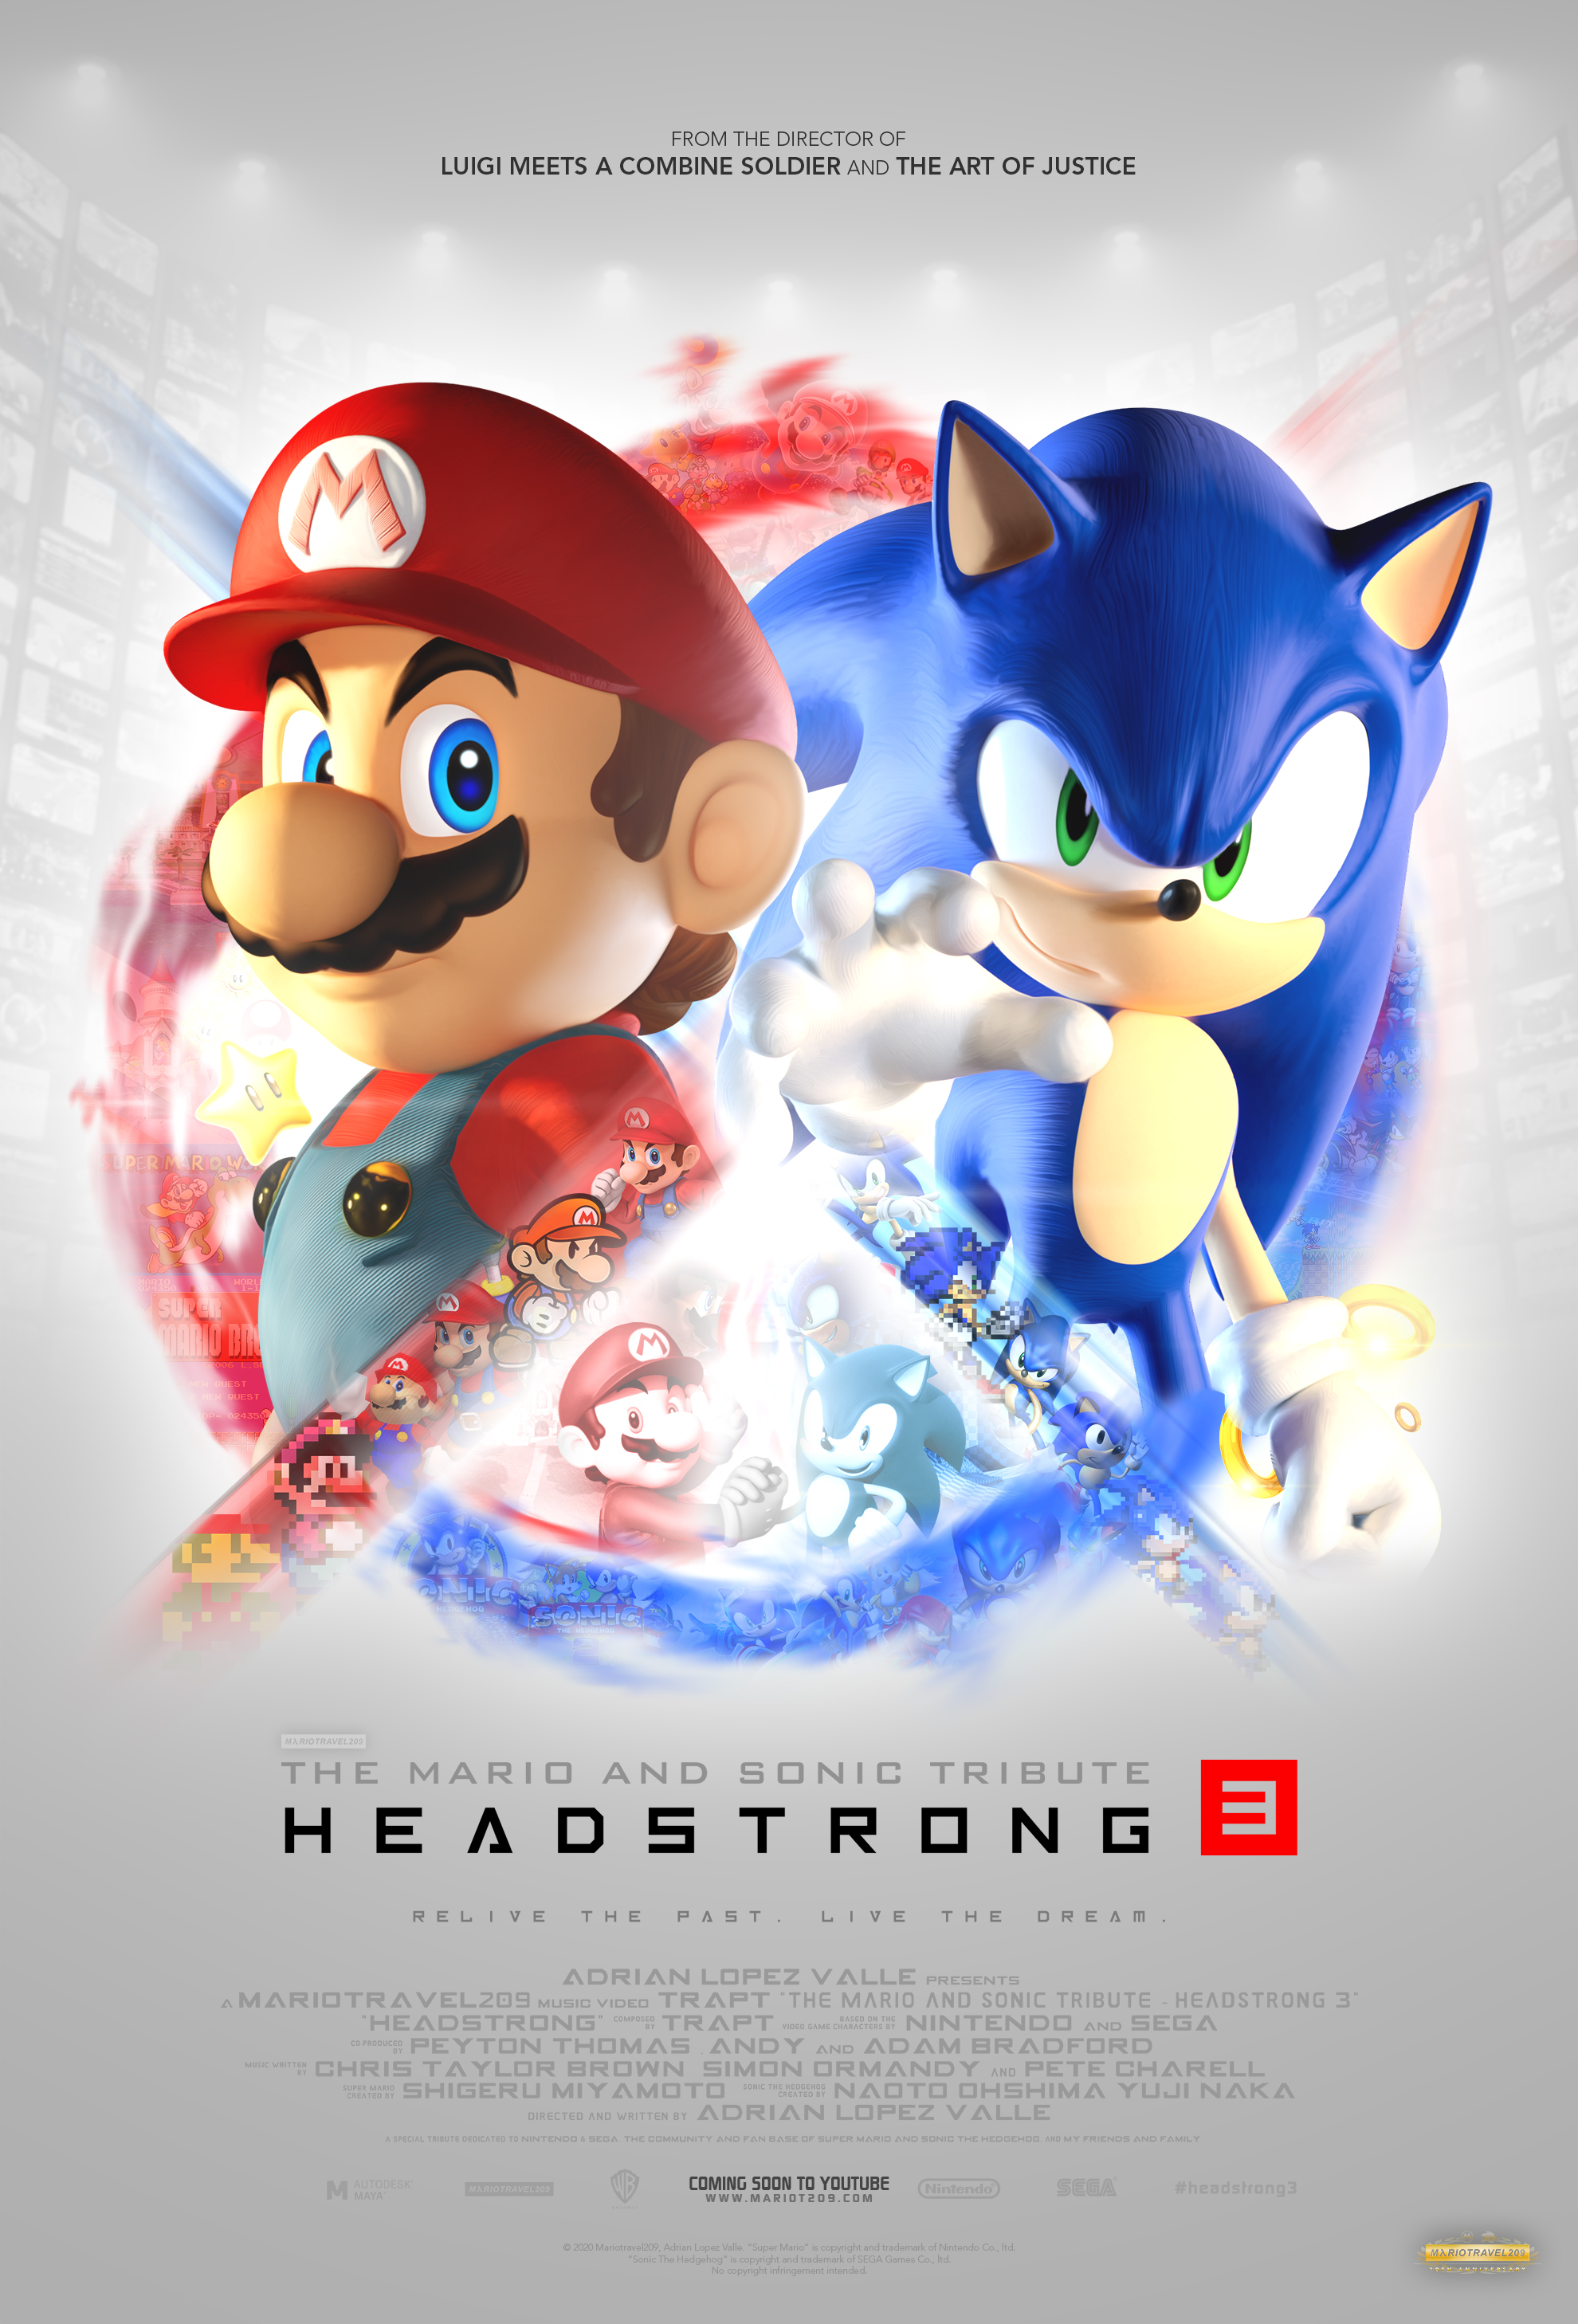 The Mario and Sonic Tribute - Headstrong 3 (2022) постер